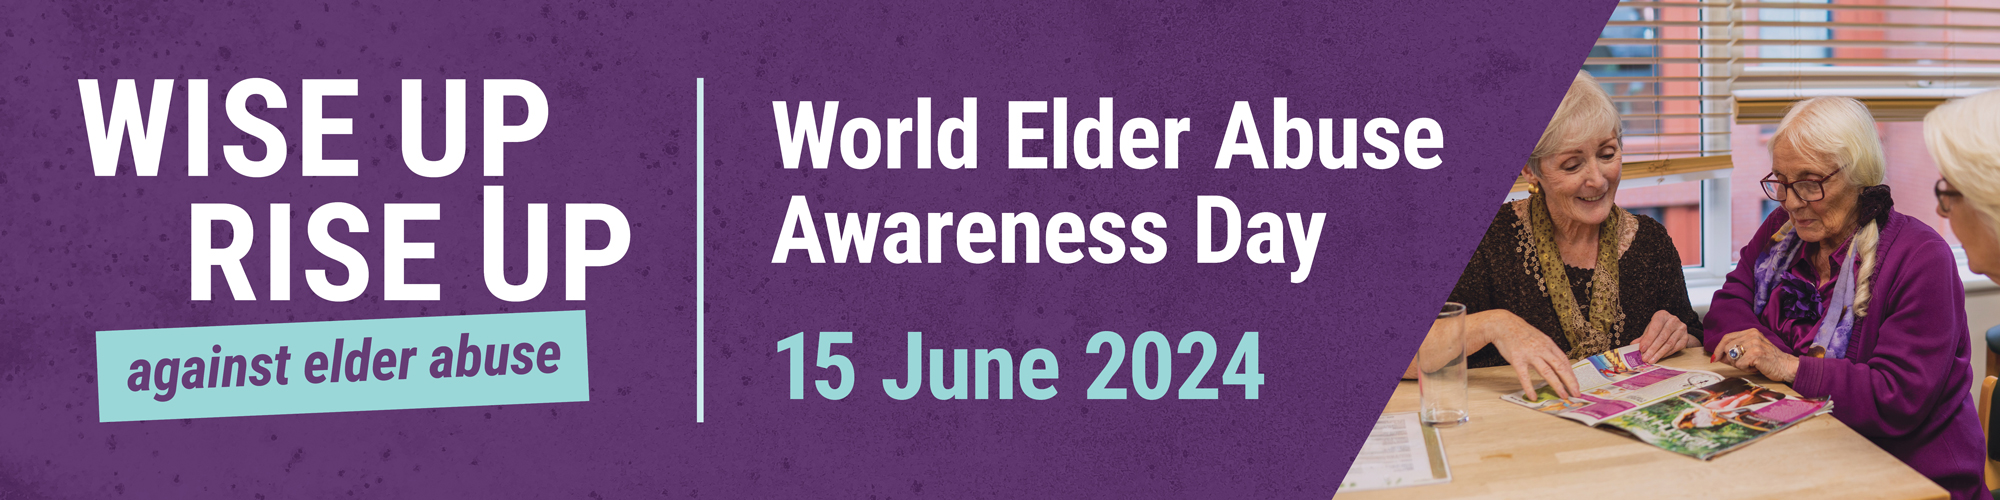 Image with the words 'wise up rise up against elder abuse - world elder abuse awareness day 15 June 2024'